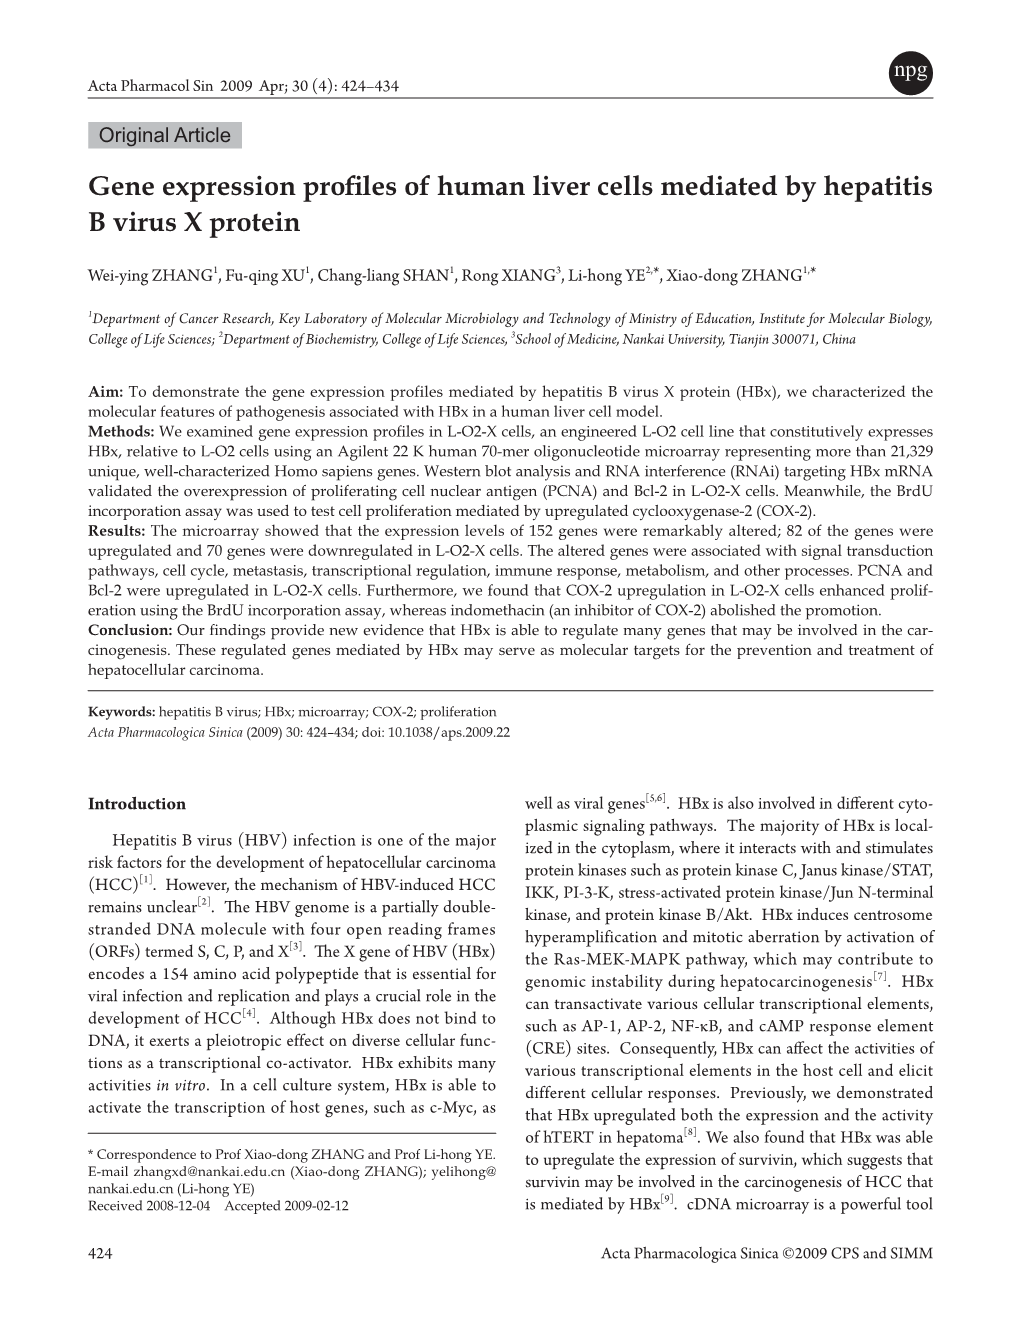 Gene Expression Profiles of Human Liver Cells Mediated by Hepatitis B Virus X Protein